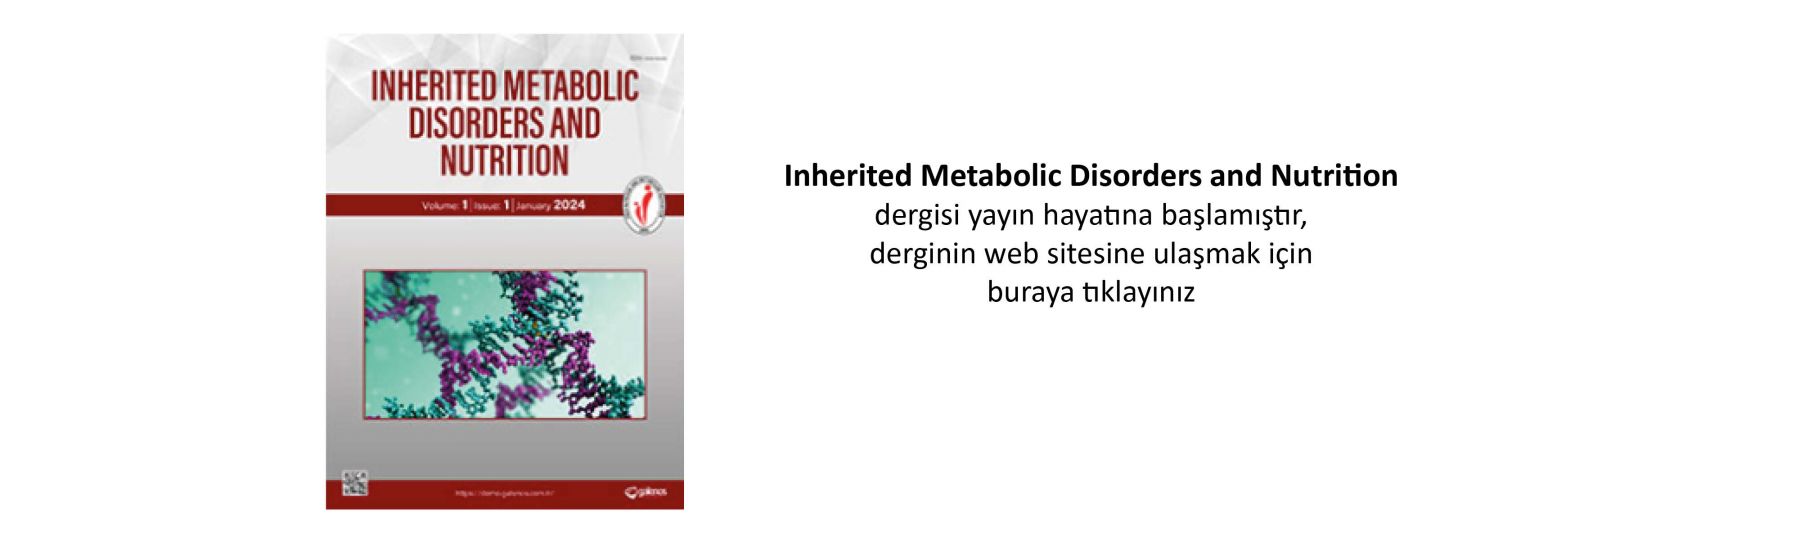 Inherited Metabolic Disorders and Nutrition